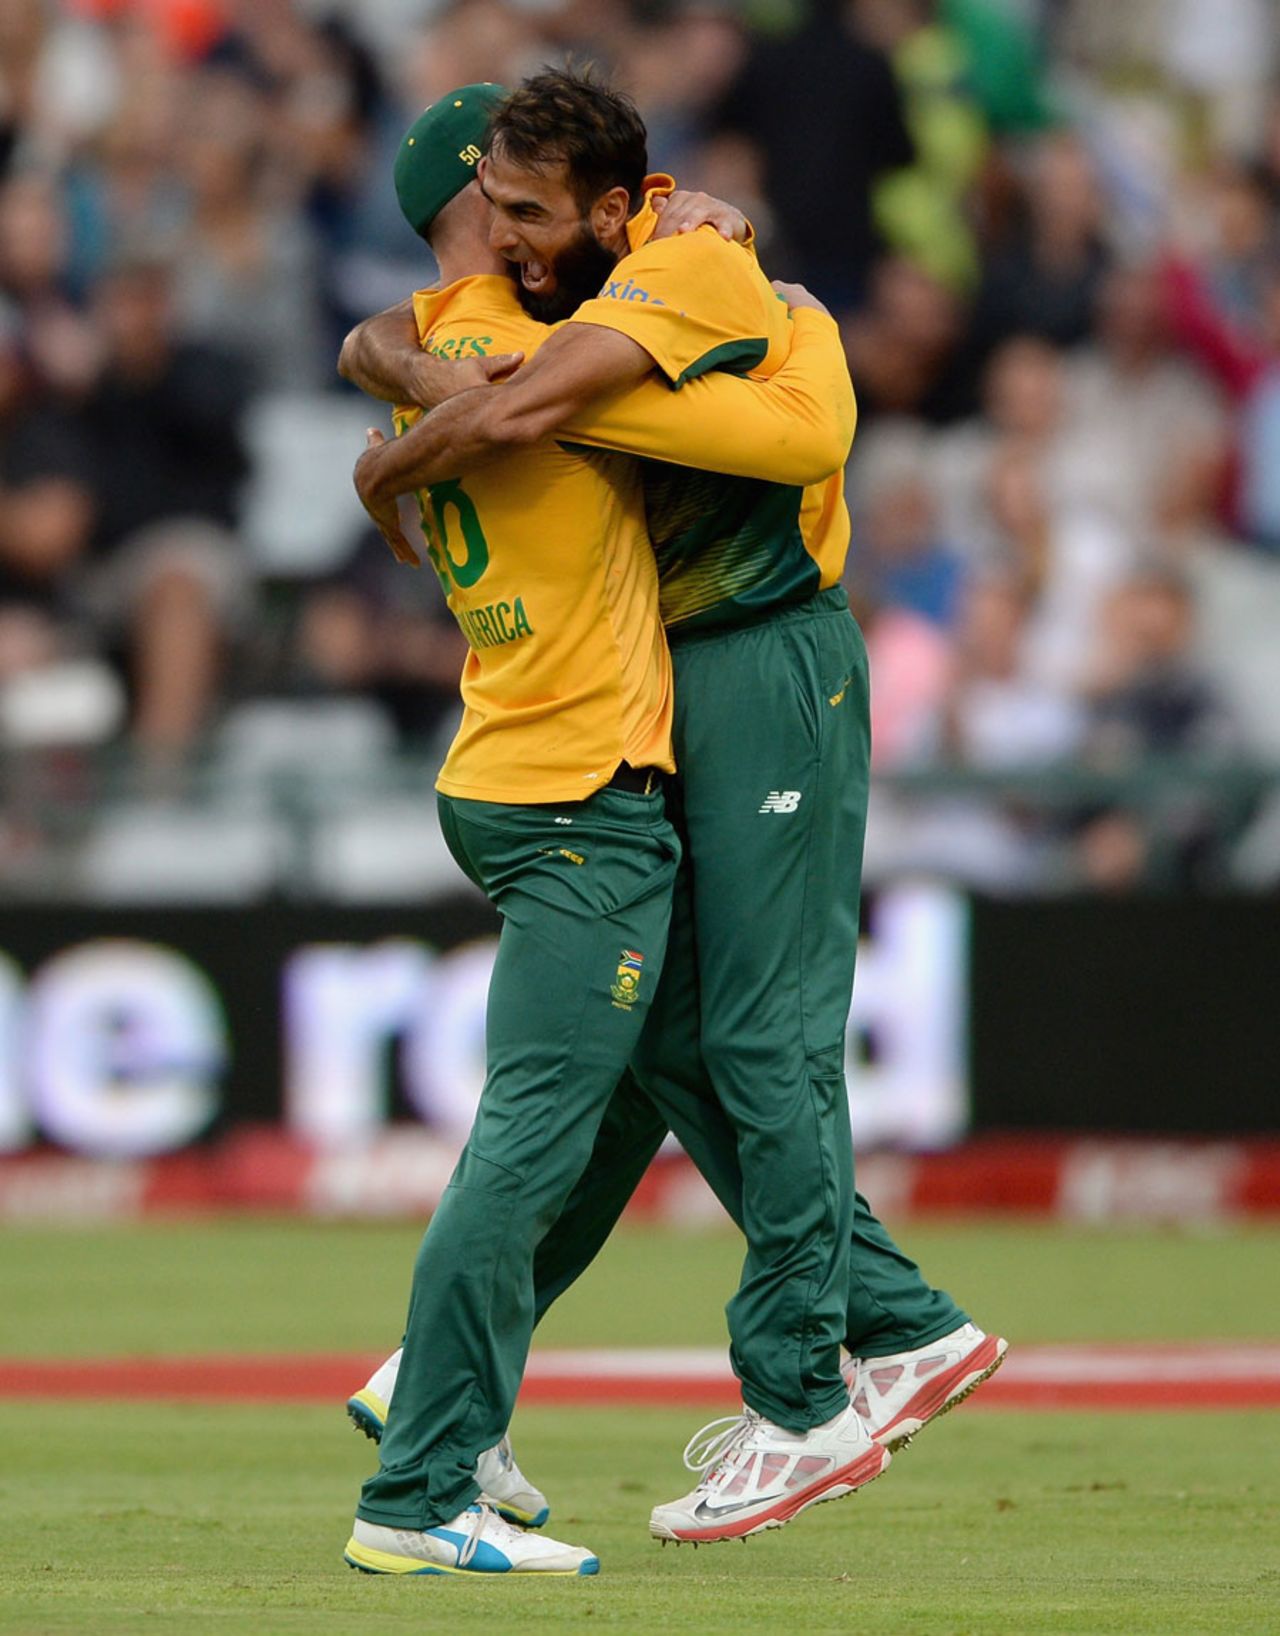 Faf du Plessis' blinding catch gave Imran Tahir his fourth wicket, South Africa v England, 1st T20, Cape Town, February 19, 2016